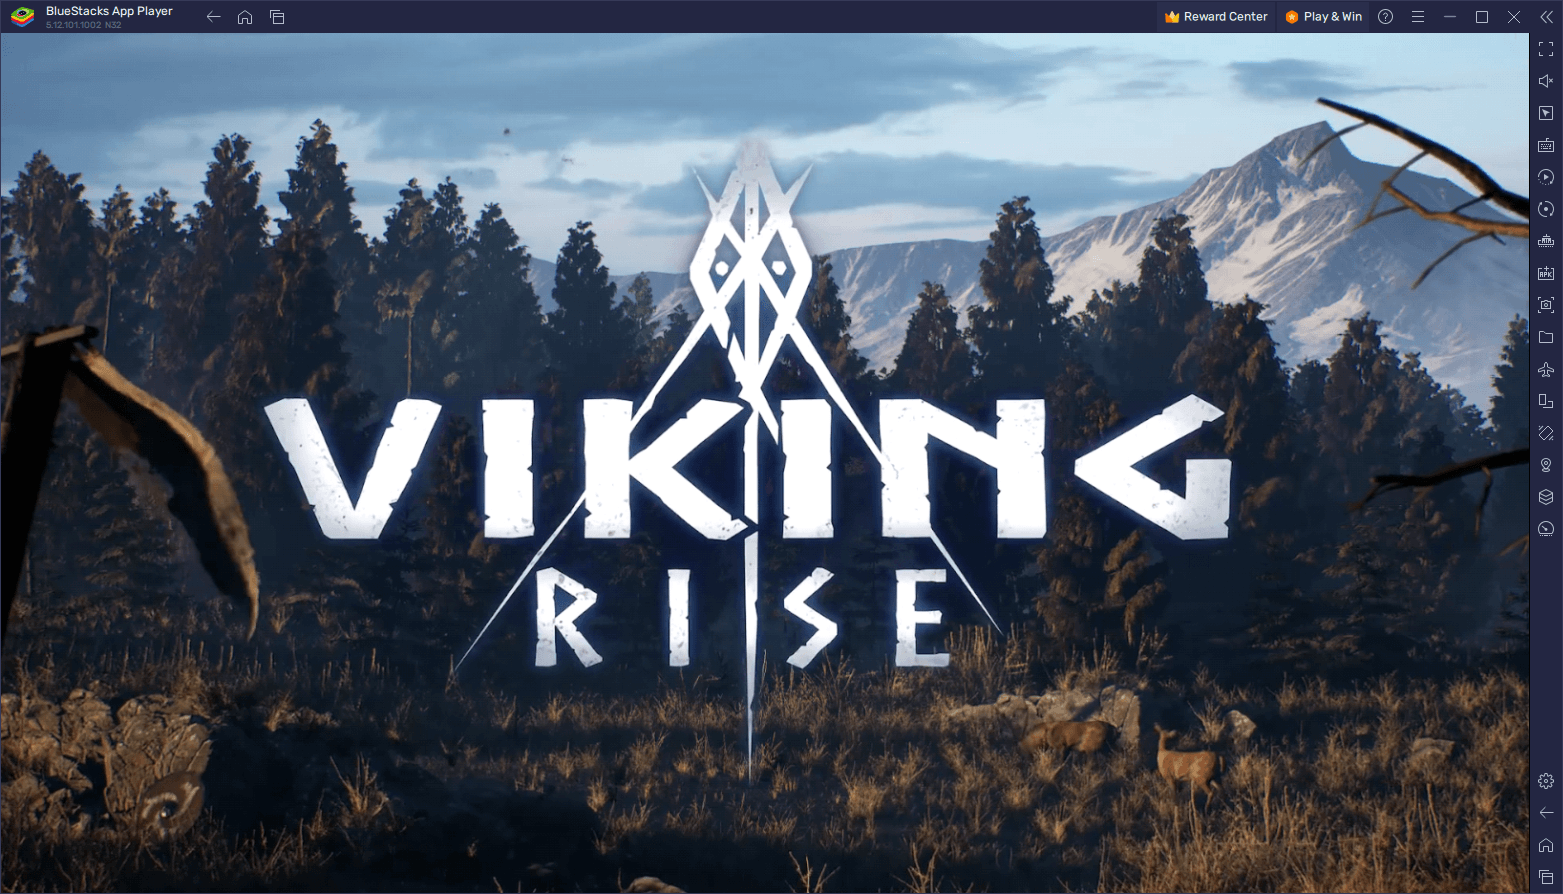 VIKING RISE New Events With Surprising Rewards. How To Complete Events  Quickly#viral #gaming #share 